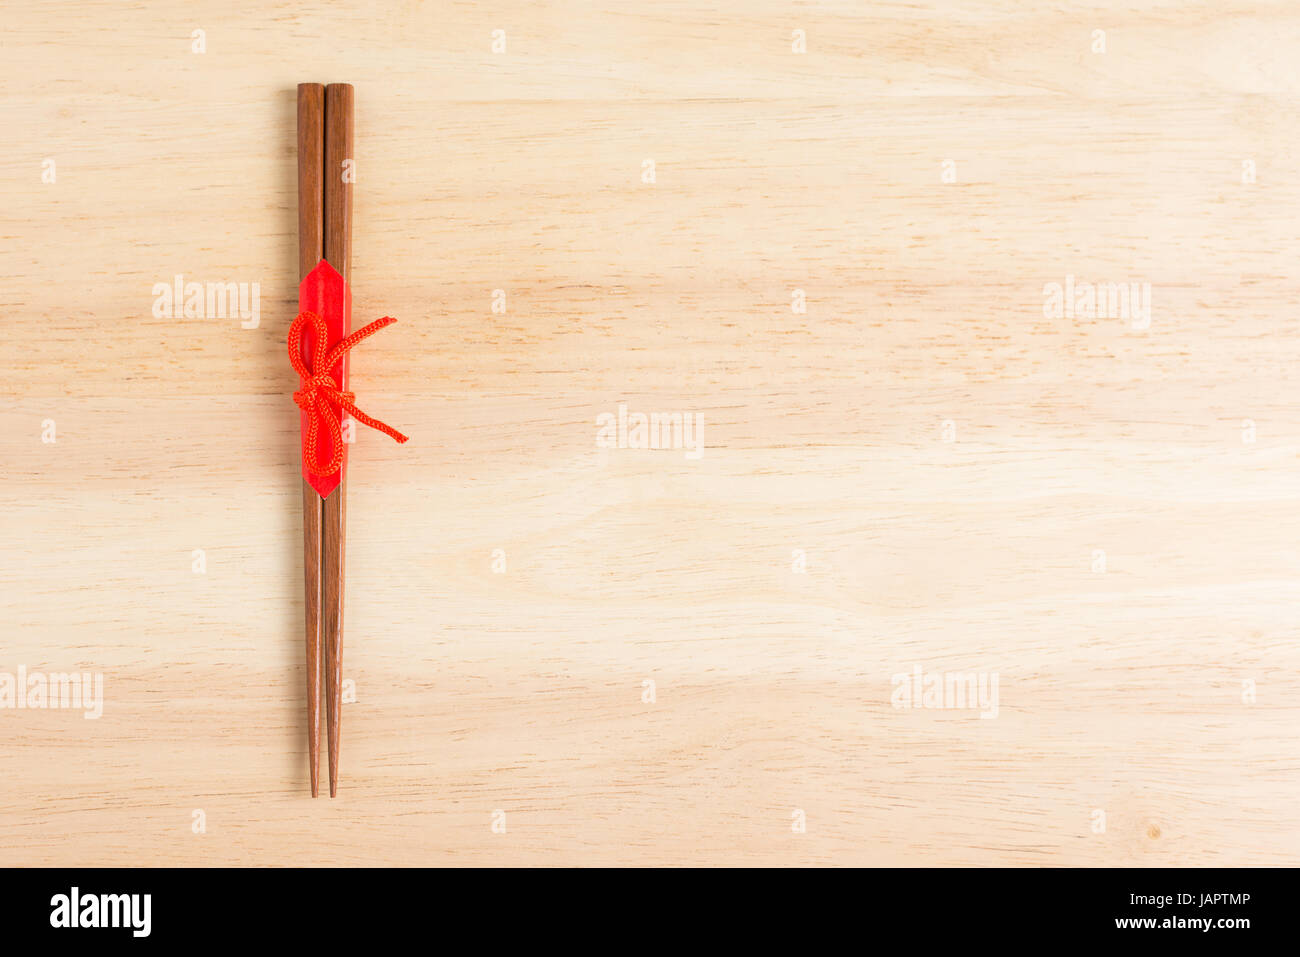 Japanese wooden chopsticks wrapped in red paper and red rope on wooden table. Stock Photo